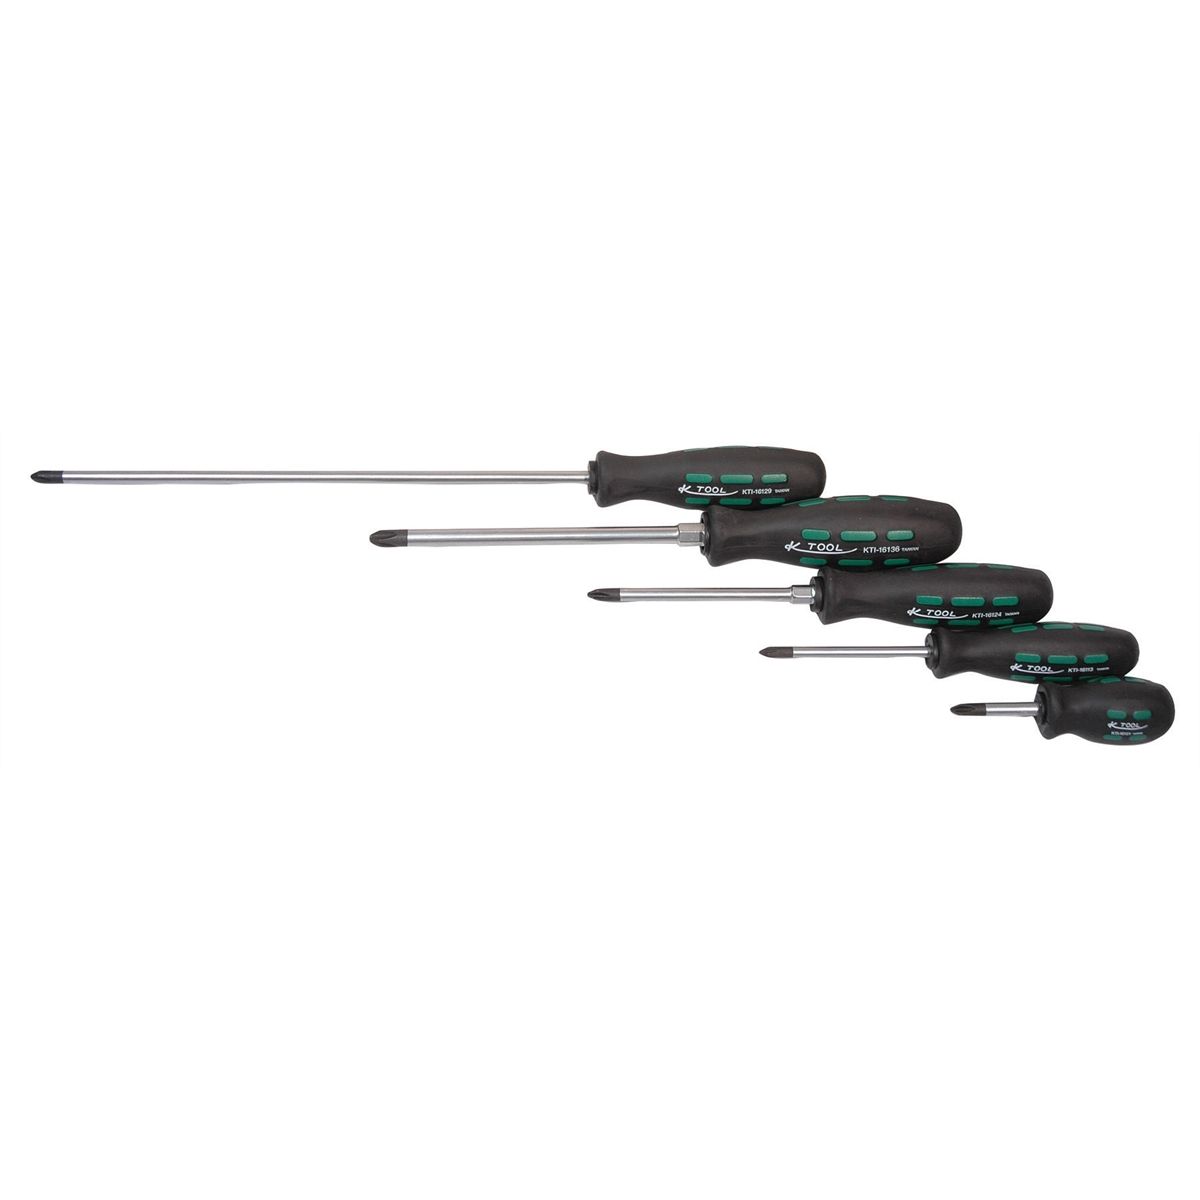 Phillips Slotted Screwdriver Set - 5 Piece